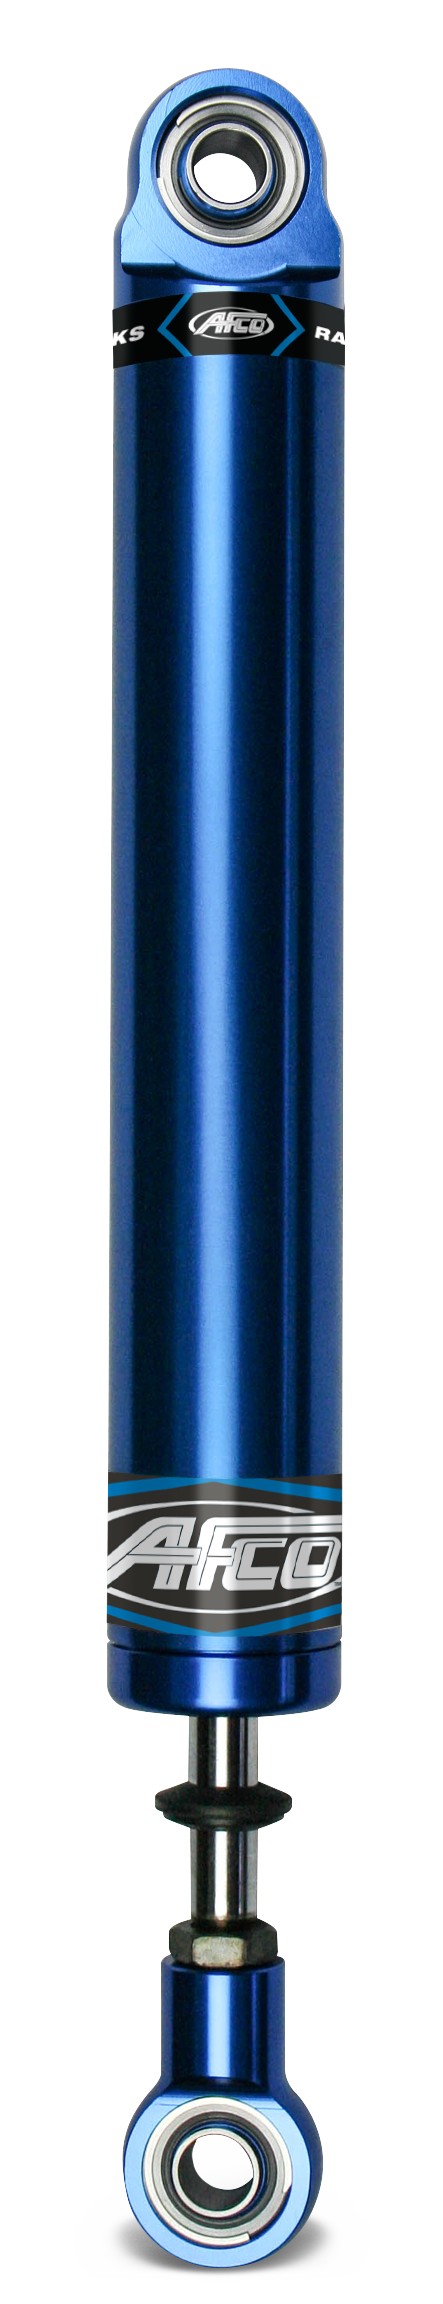 Aluminum Shock Twin Tube 16 Series Small Body 7 Inch Comp 2/Reb 2 Smooth   